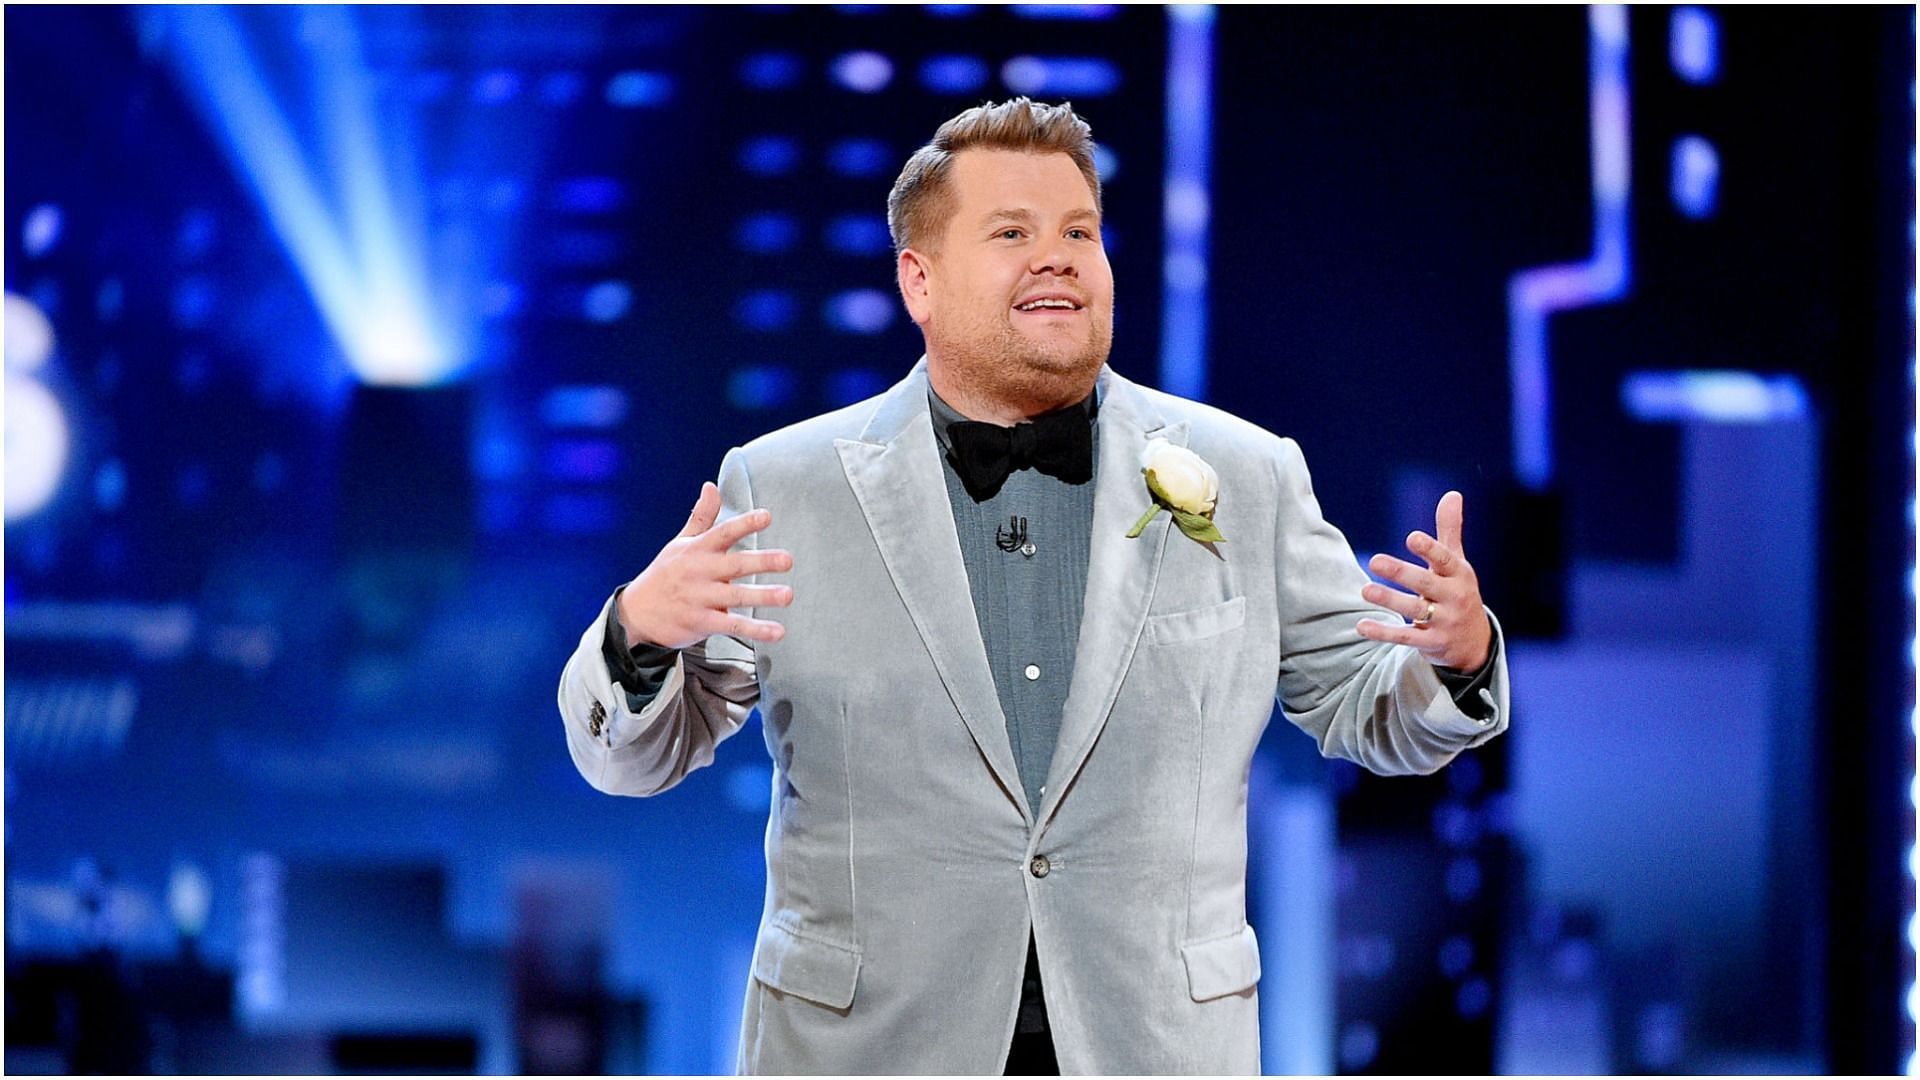 James Corden speaks on stage during the 2019 Tony Awards at Radio City Music Hall (Image by Theo Wargo via Getty Images)